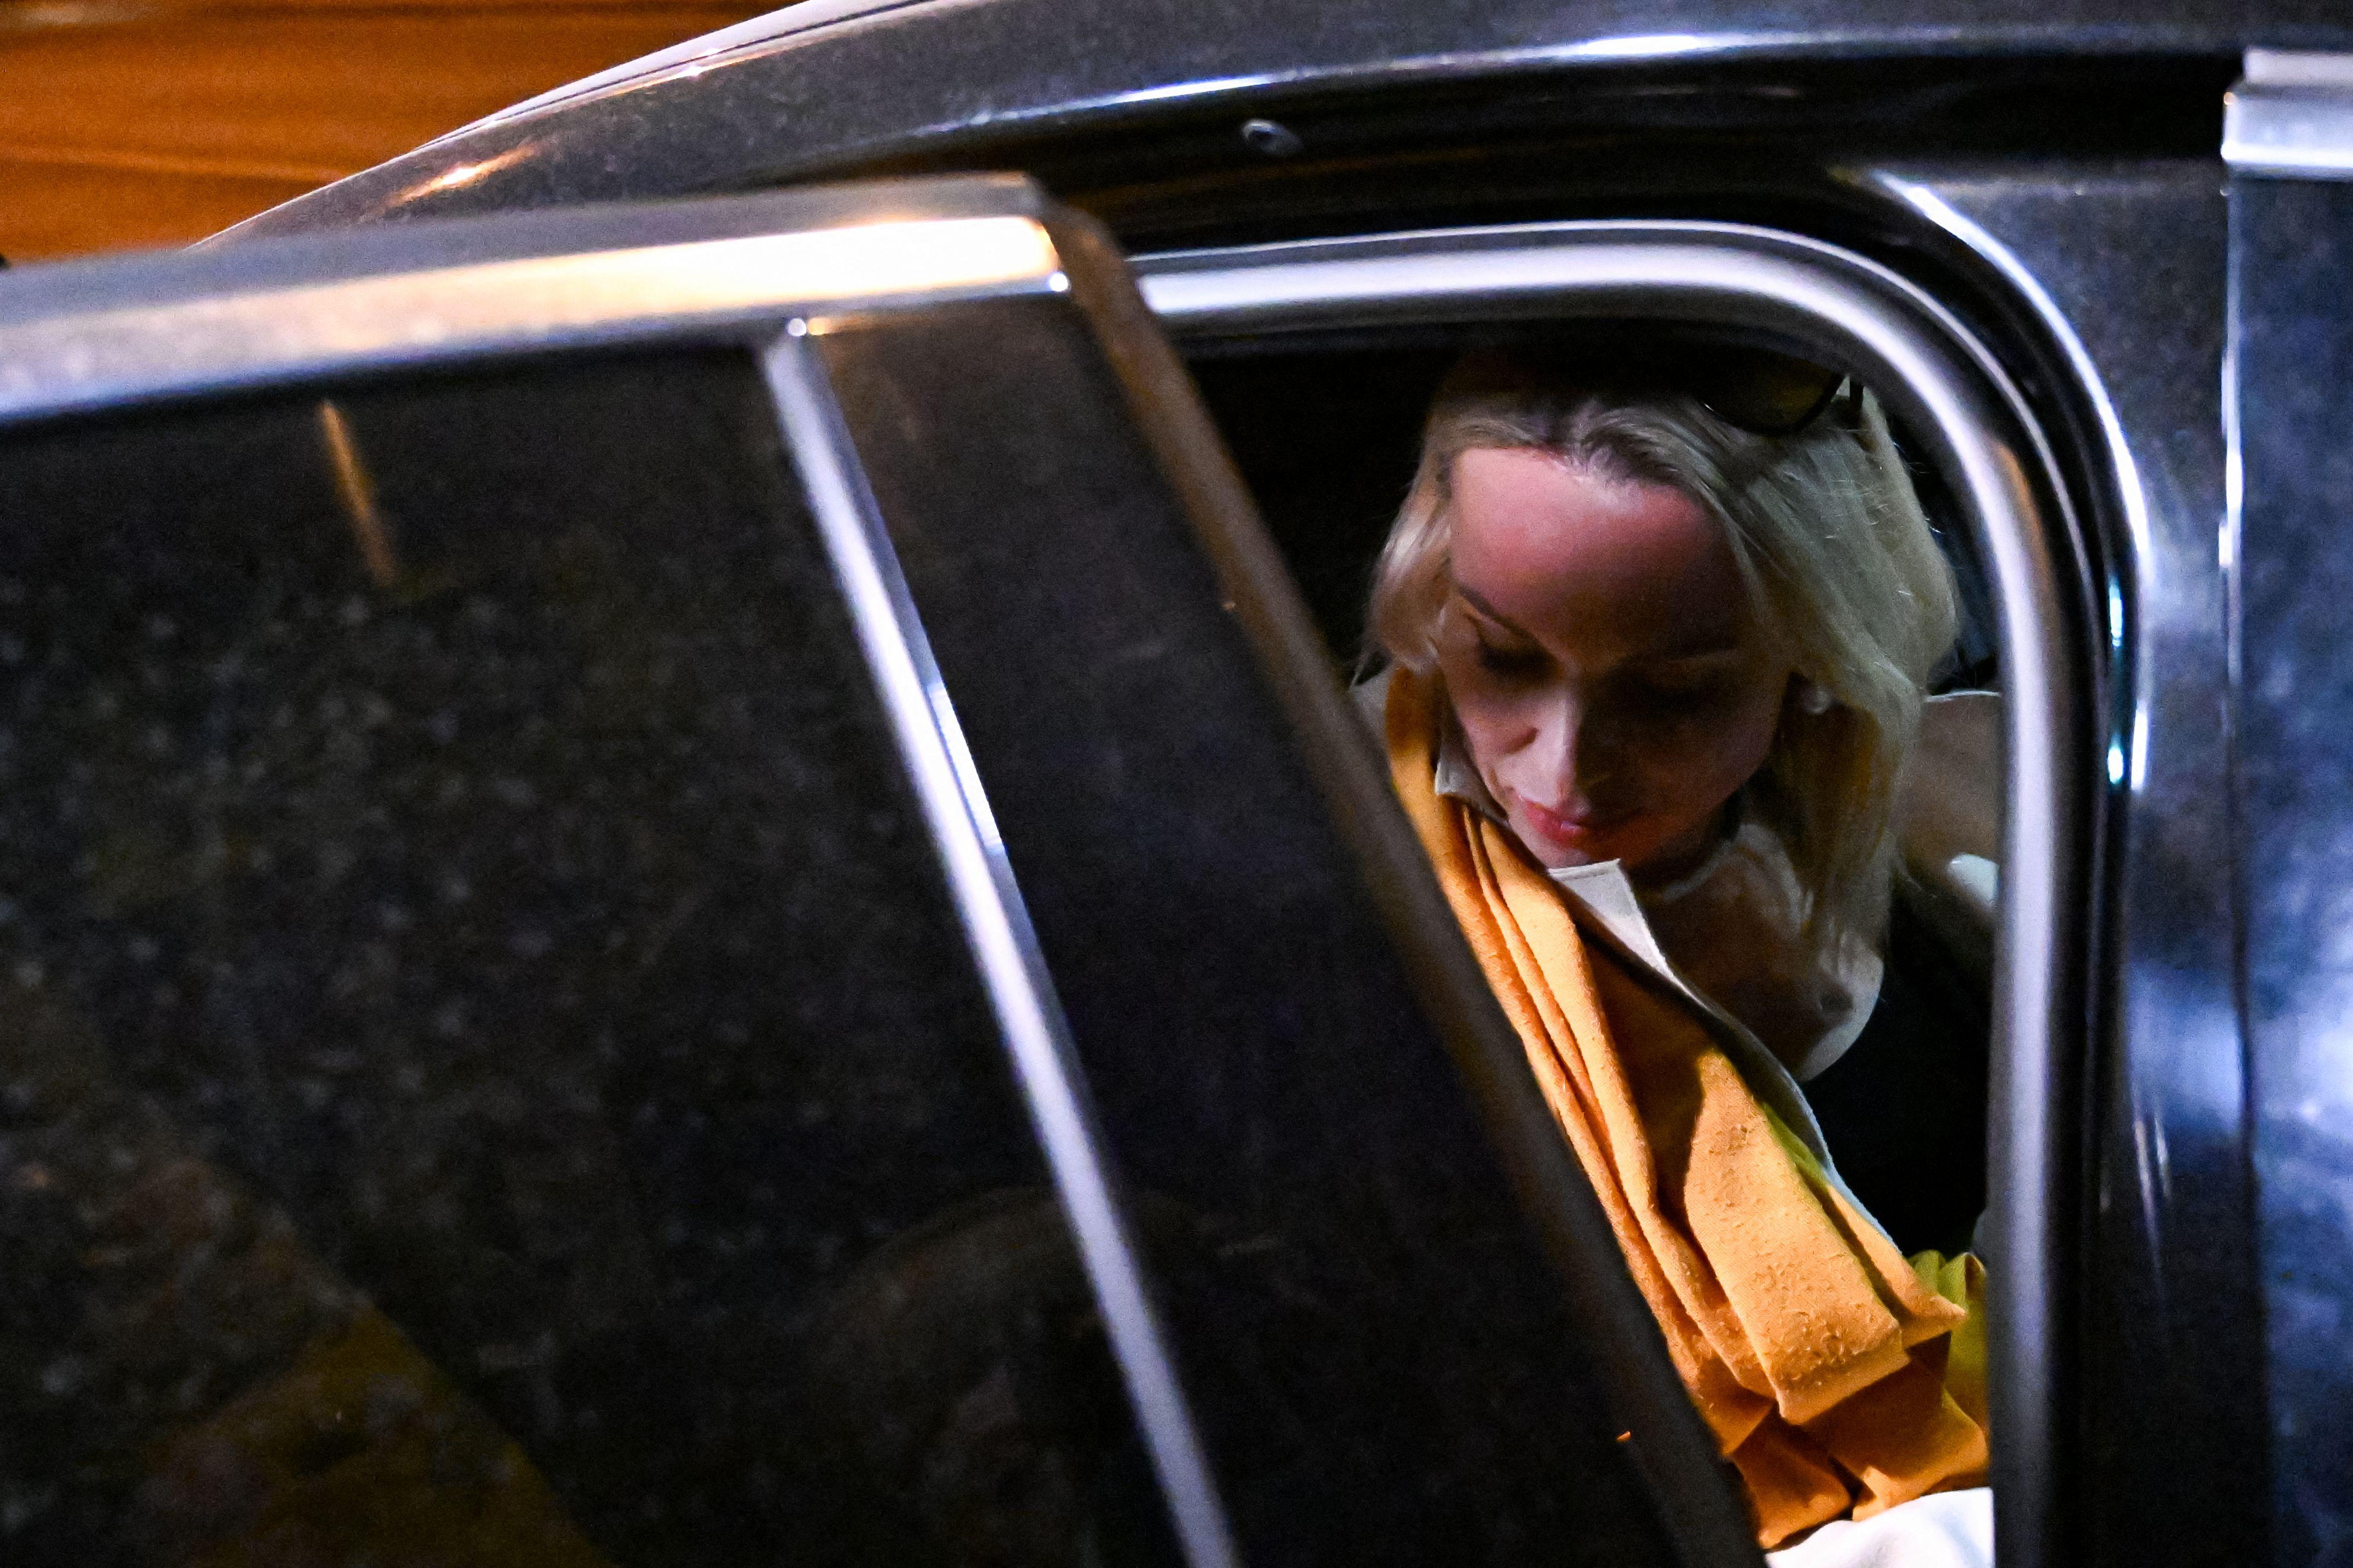 A woman sits in a car with the door half-open.